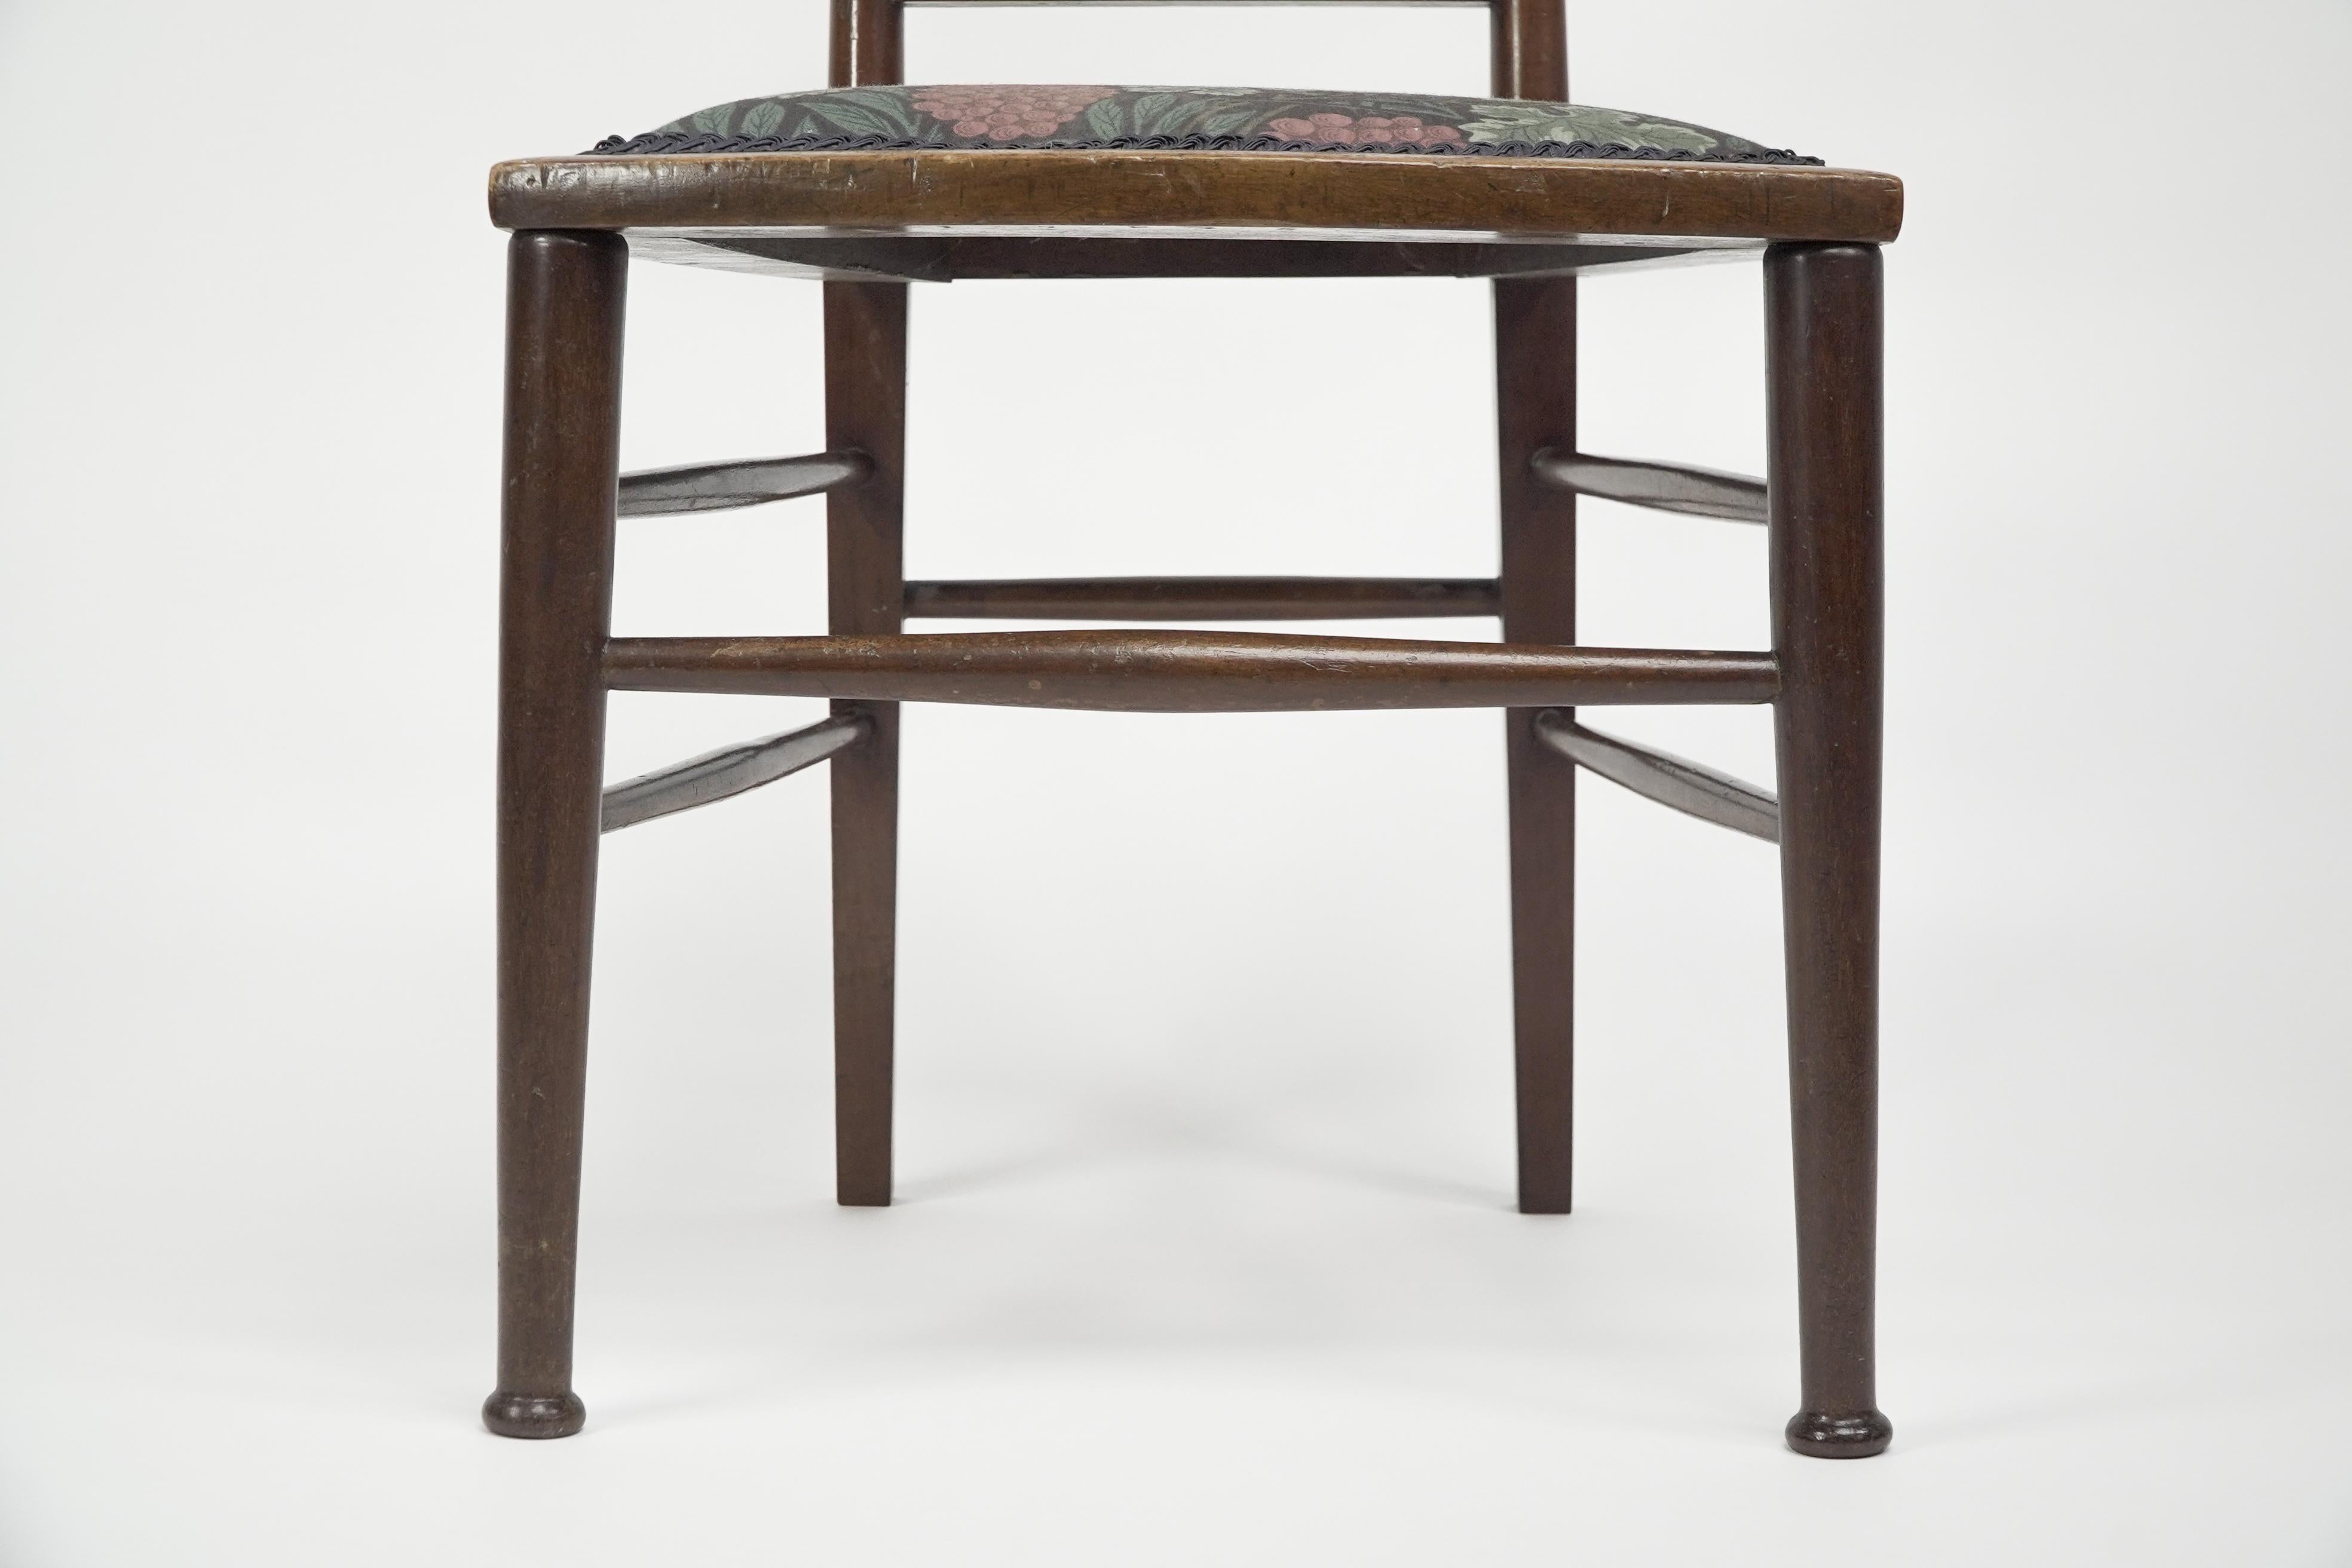 E G Punnett for Liberty & Co. A Walnut side chair with inlaid floral decoration. For Sale 4